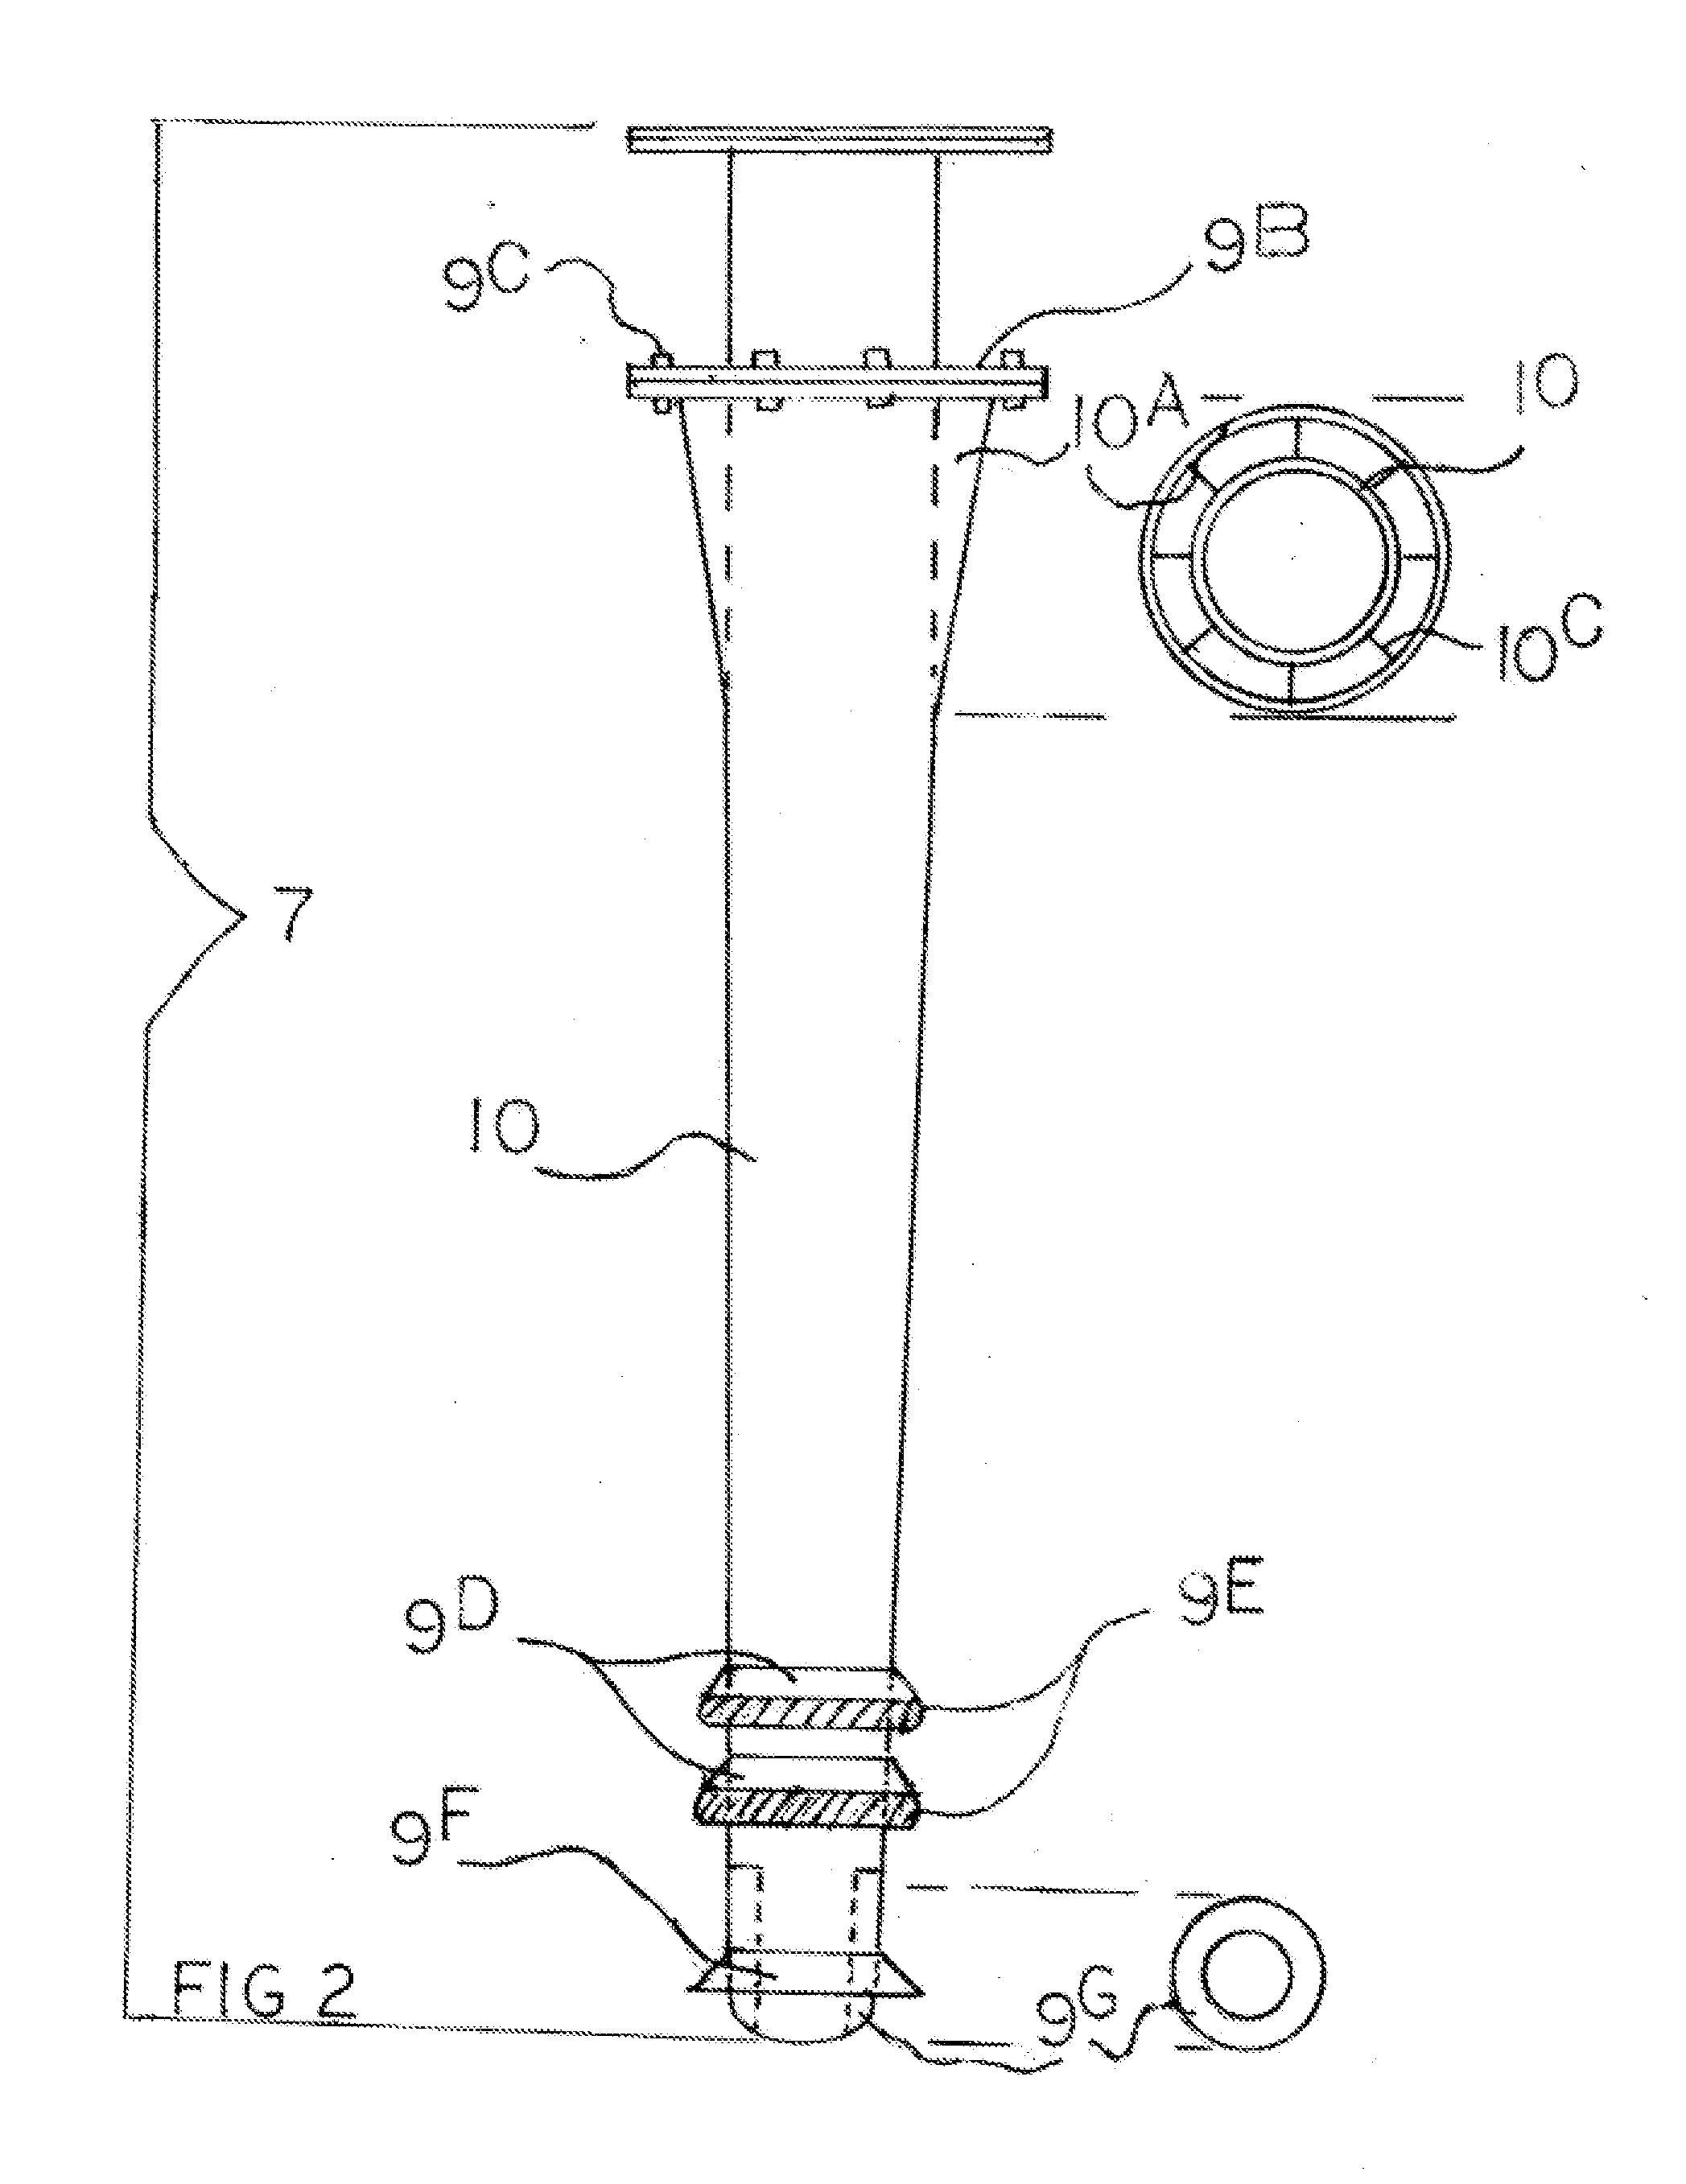 Lower emergency marine riser(LEMR) and method of installation preventing catastrophic product spills